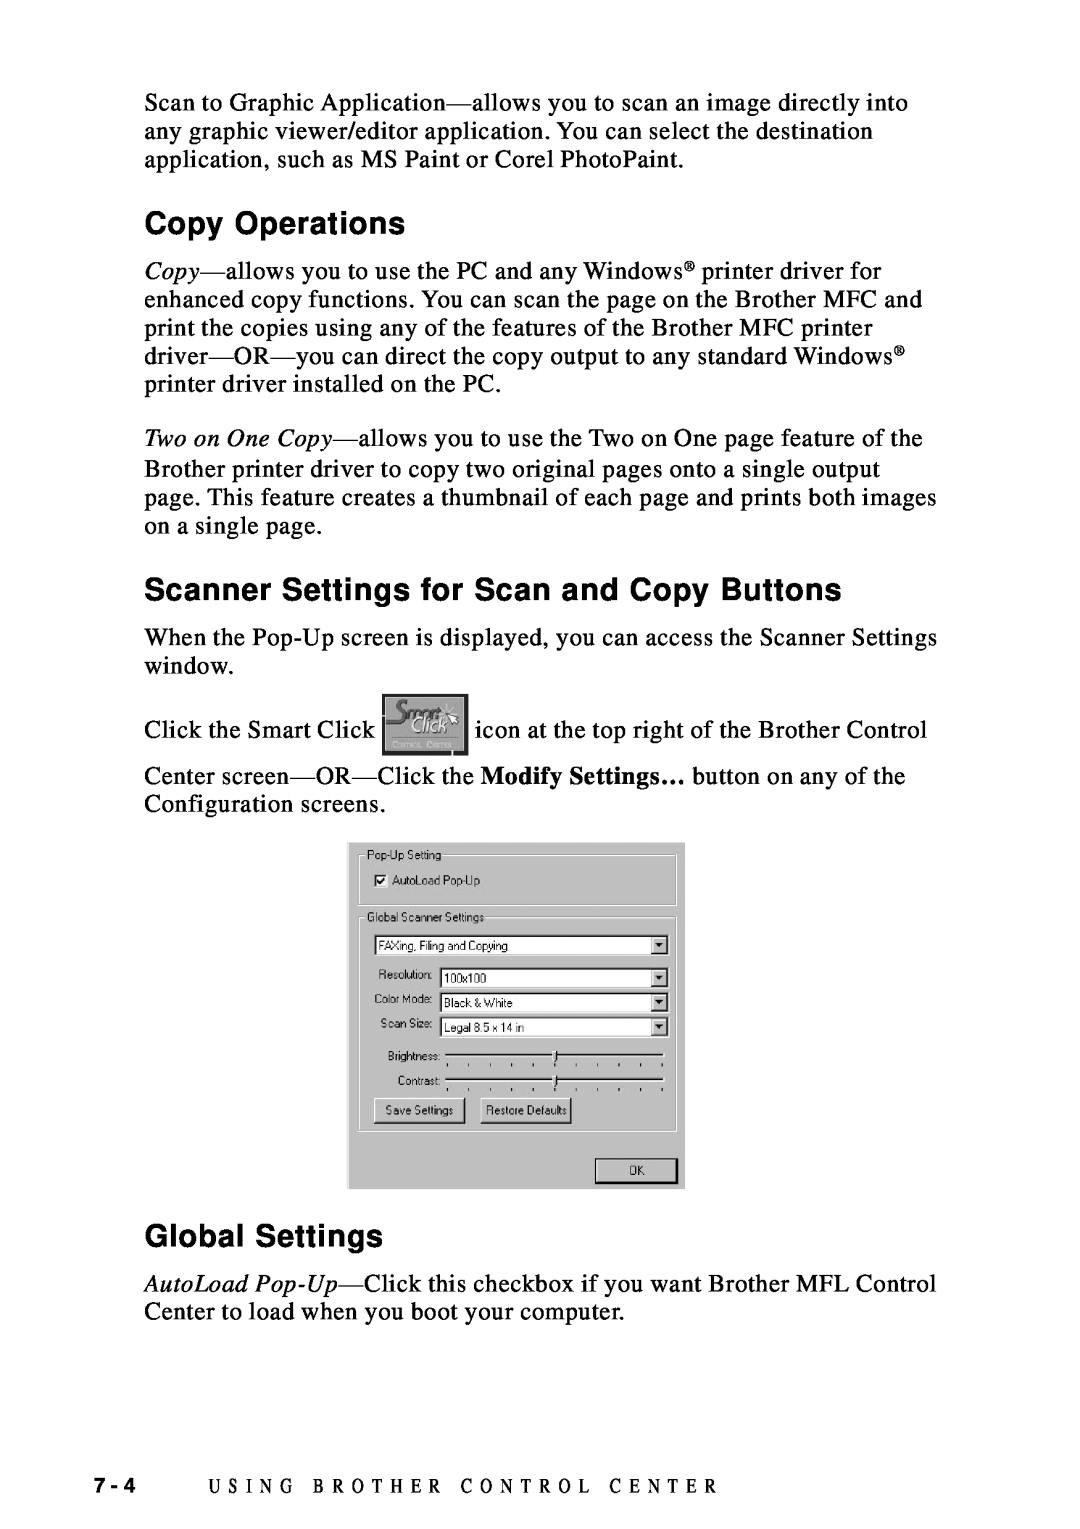 Brother DCP1200 manual Copy Operations, Scanner Settings for Scan and Copy Buttons, Global Settings 